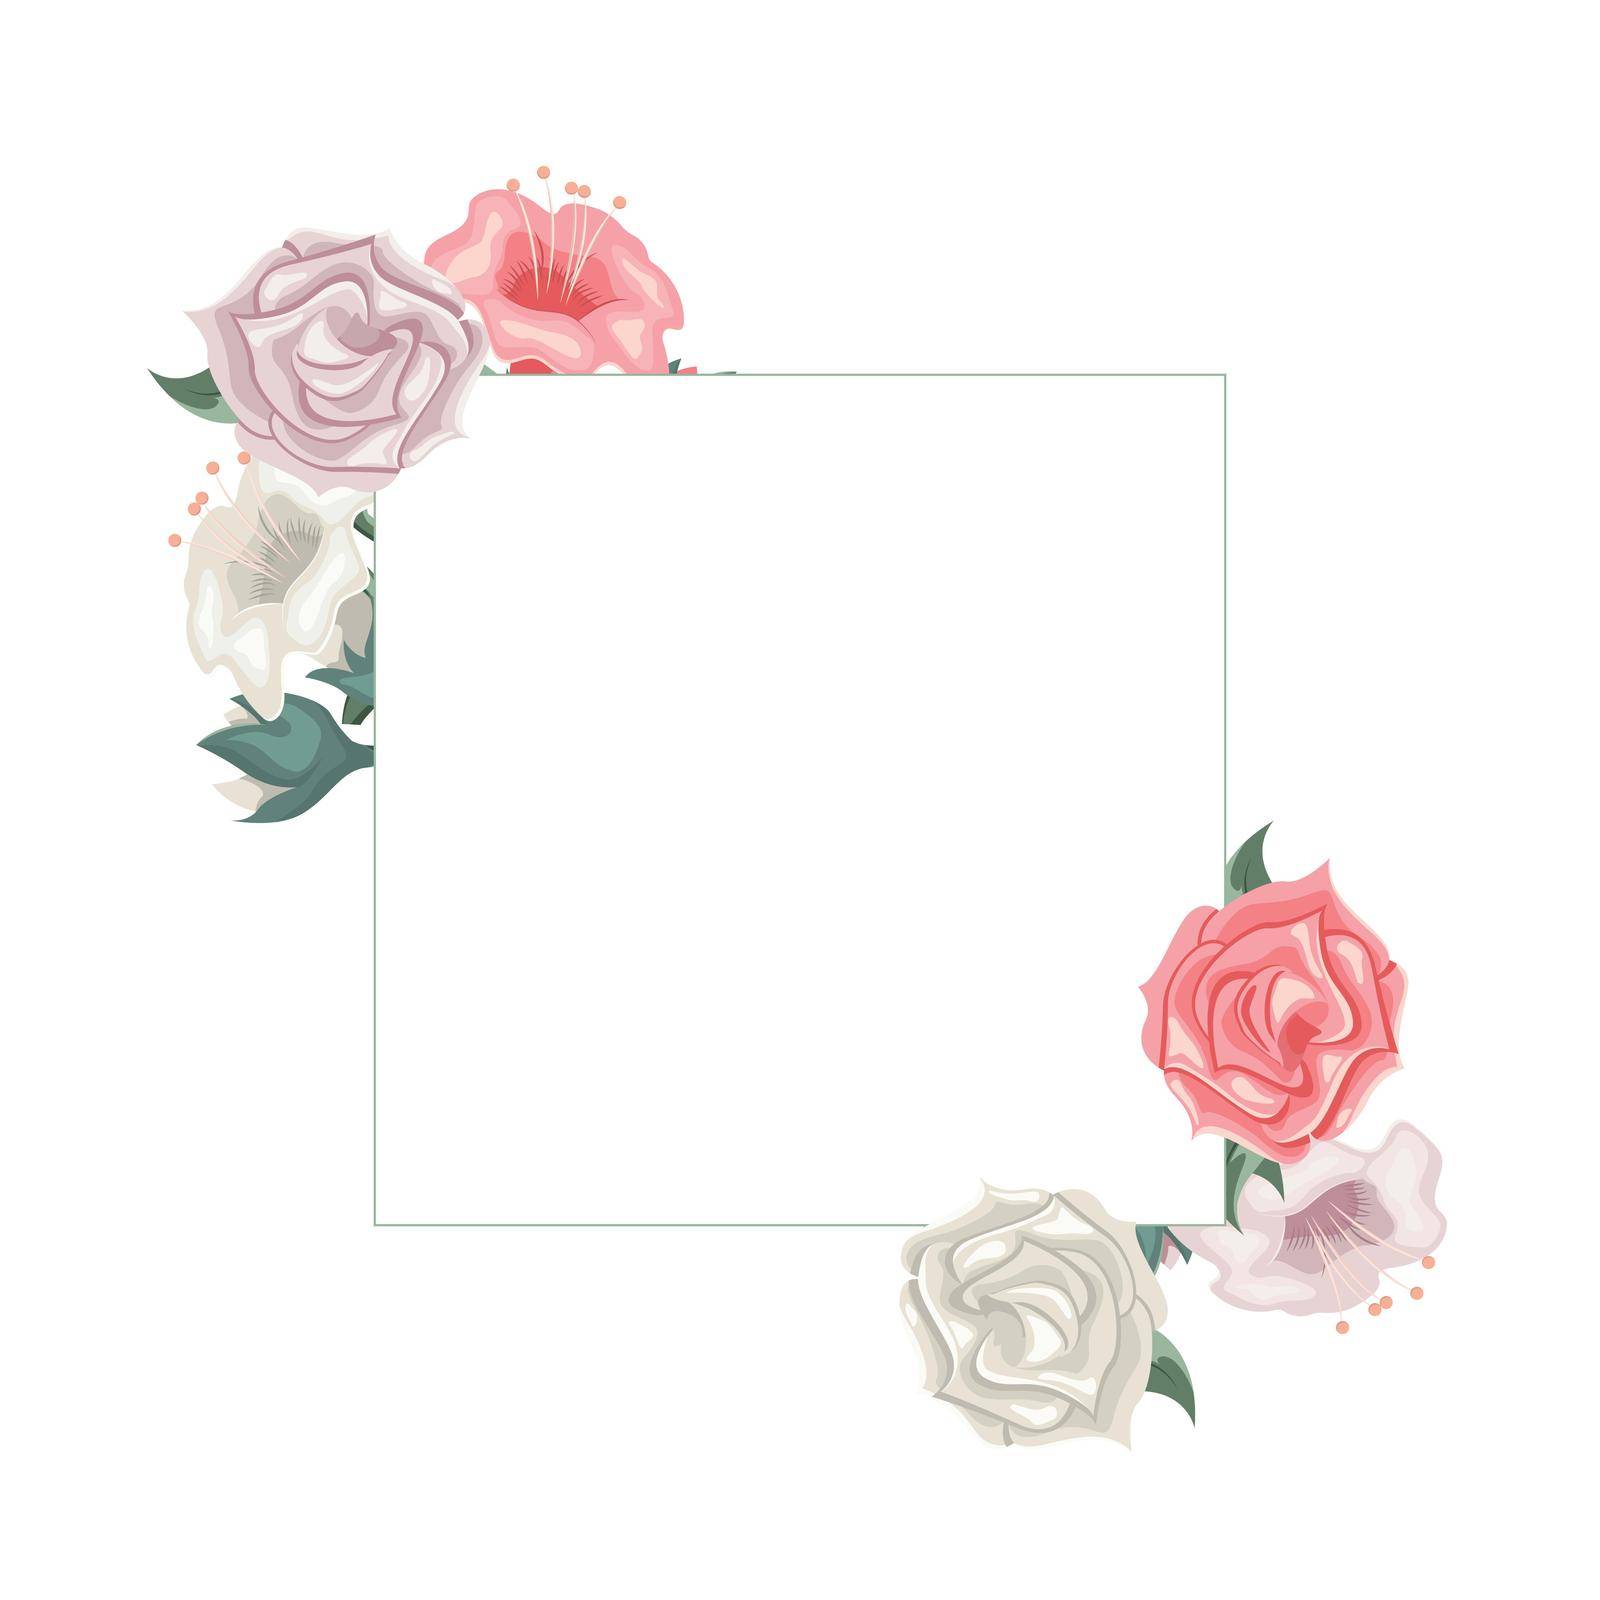 Floral frame with roses and tulips. Floral arrangement